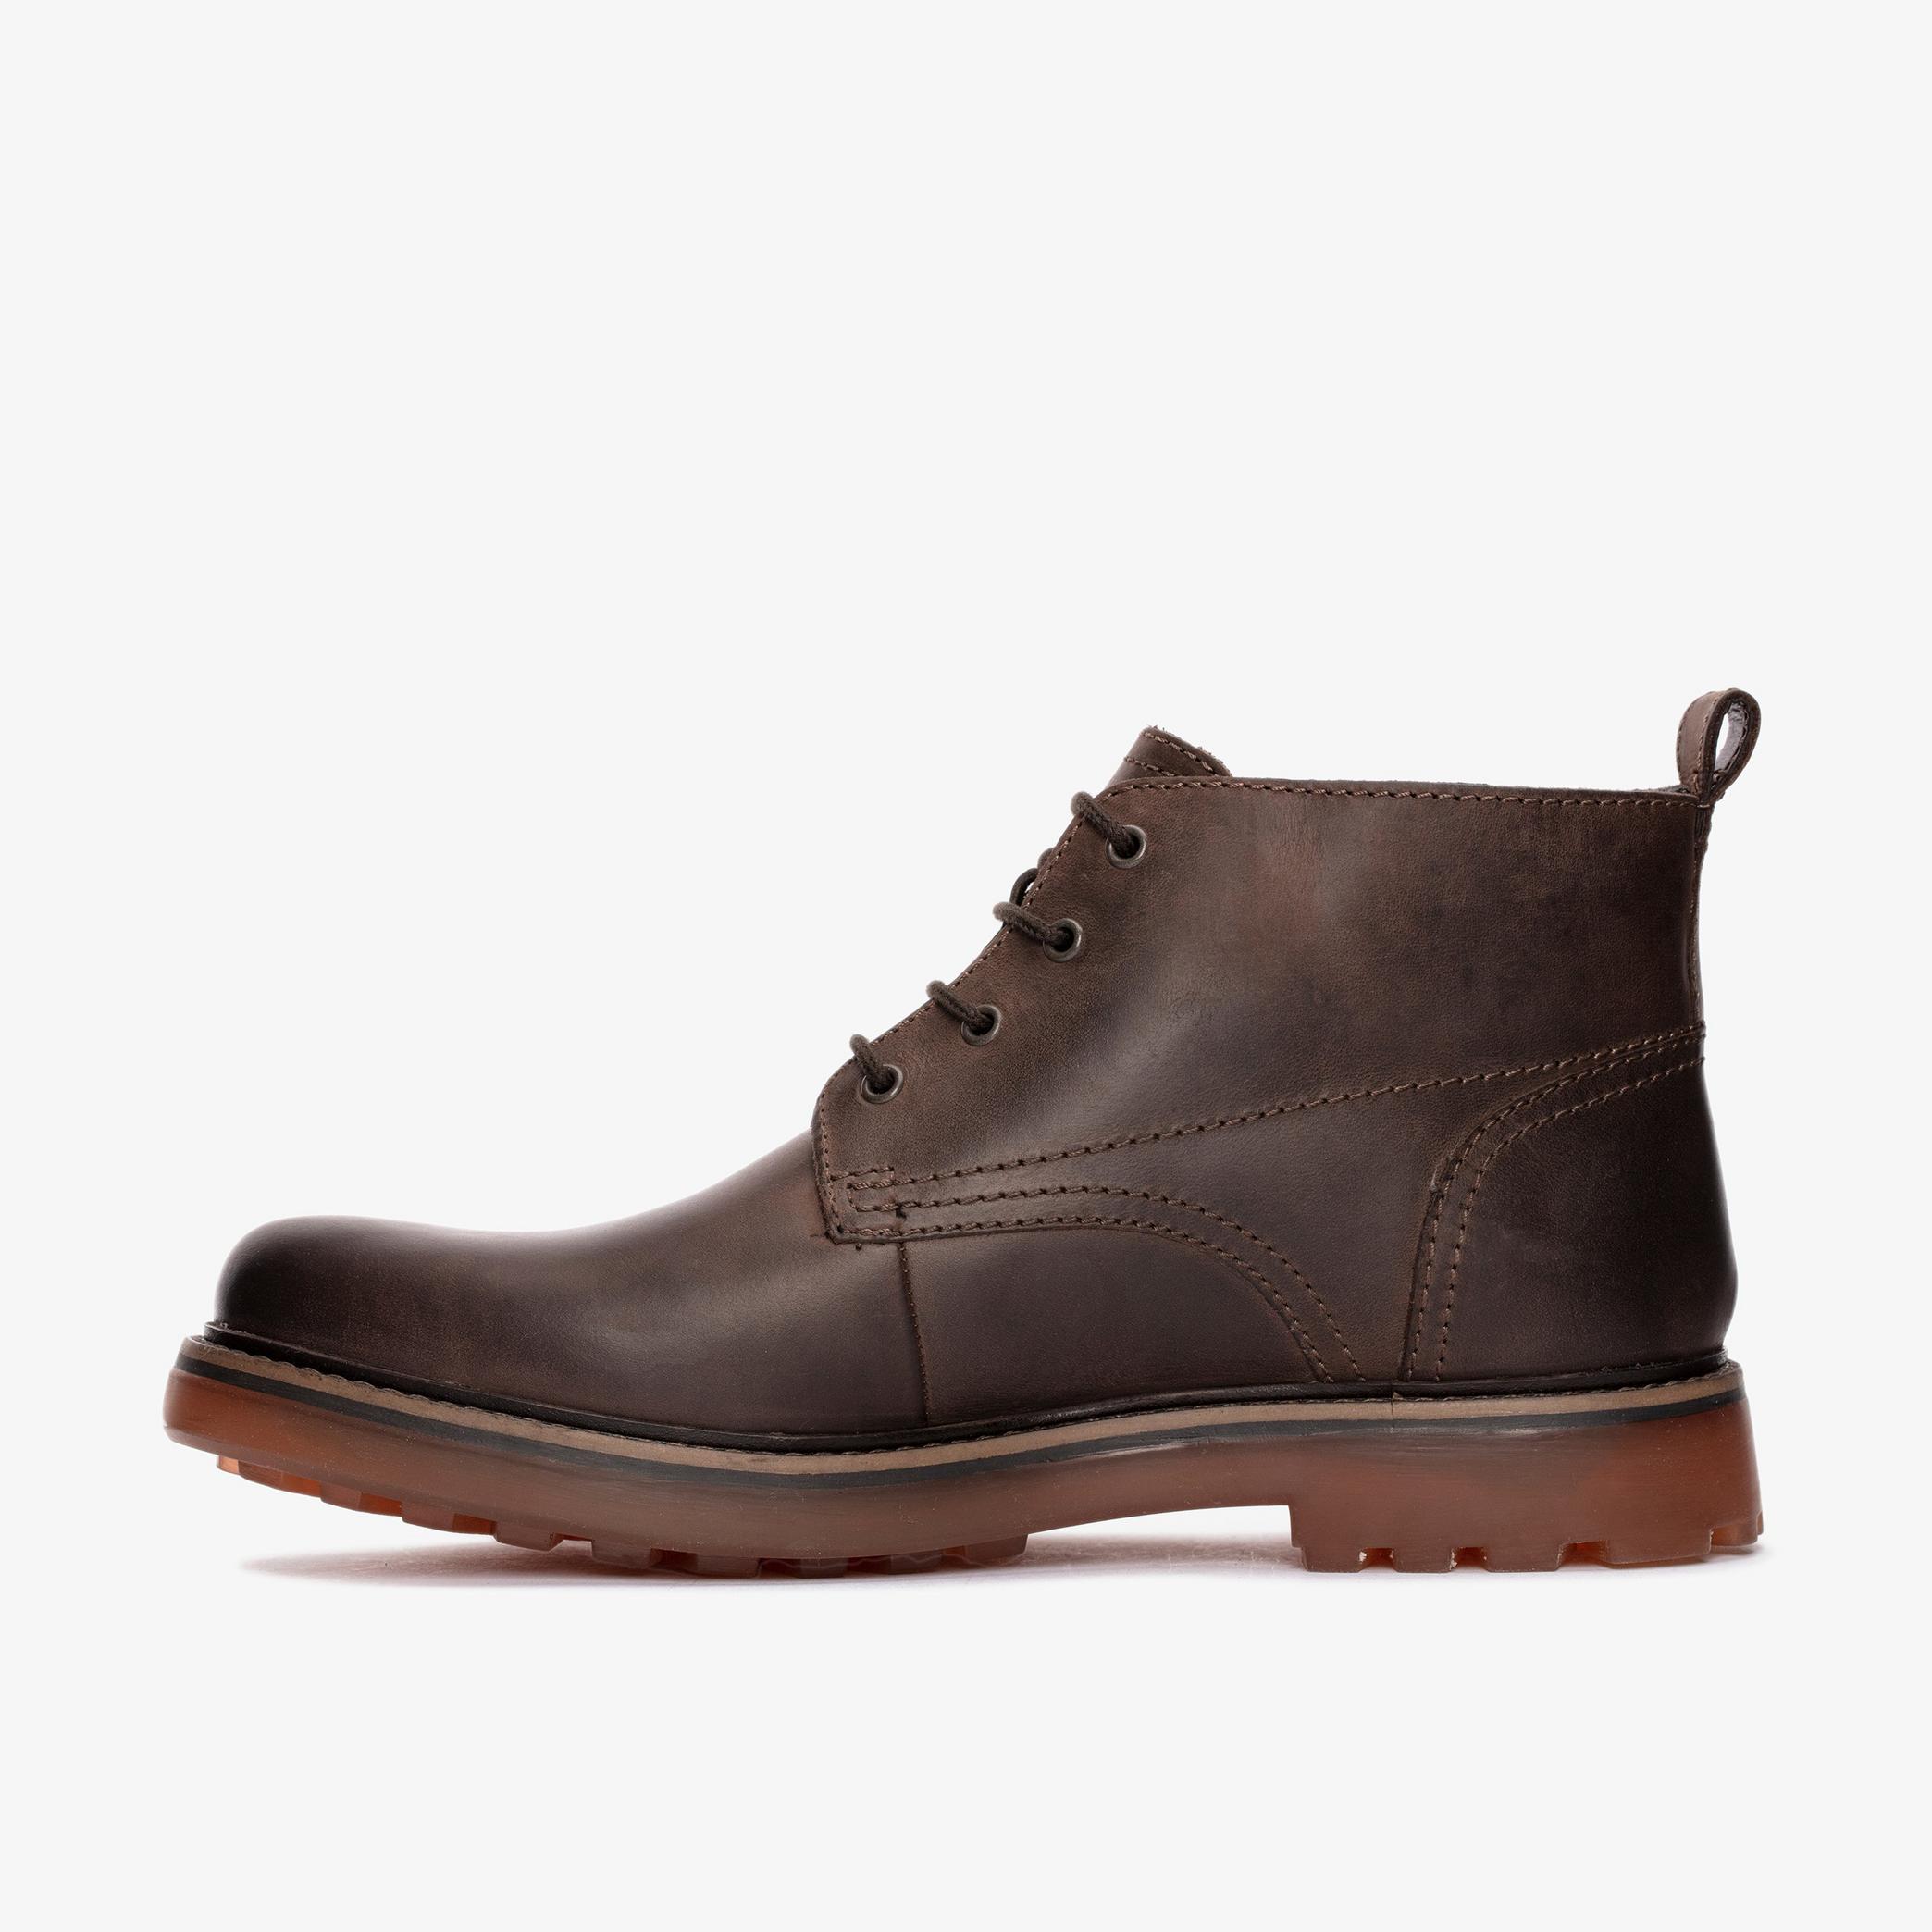 Chard Mid Dark Brown Leather Ankle Boots, view 2 of 6